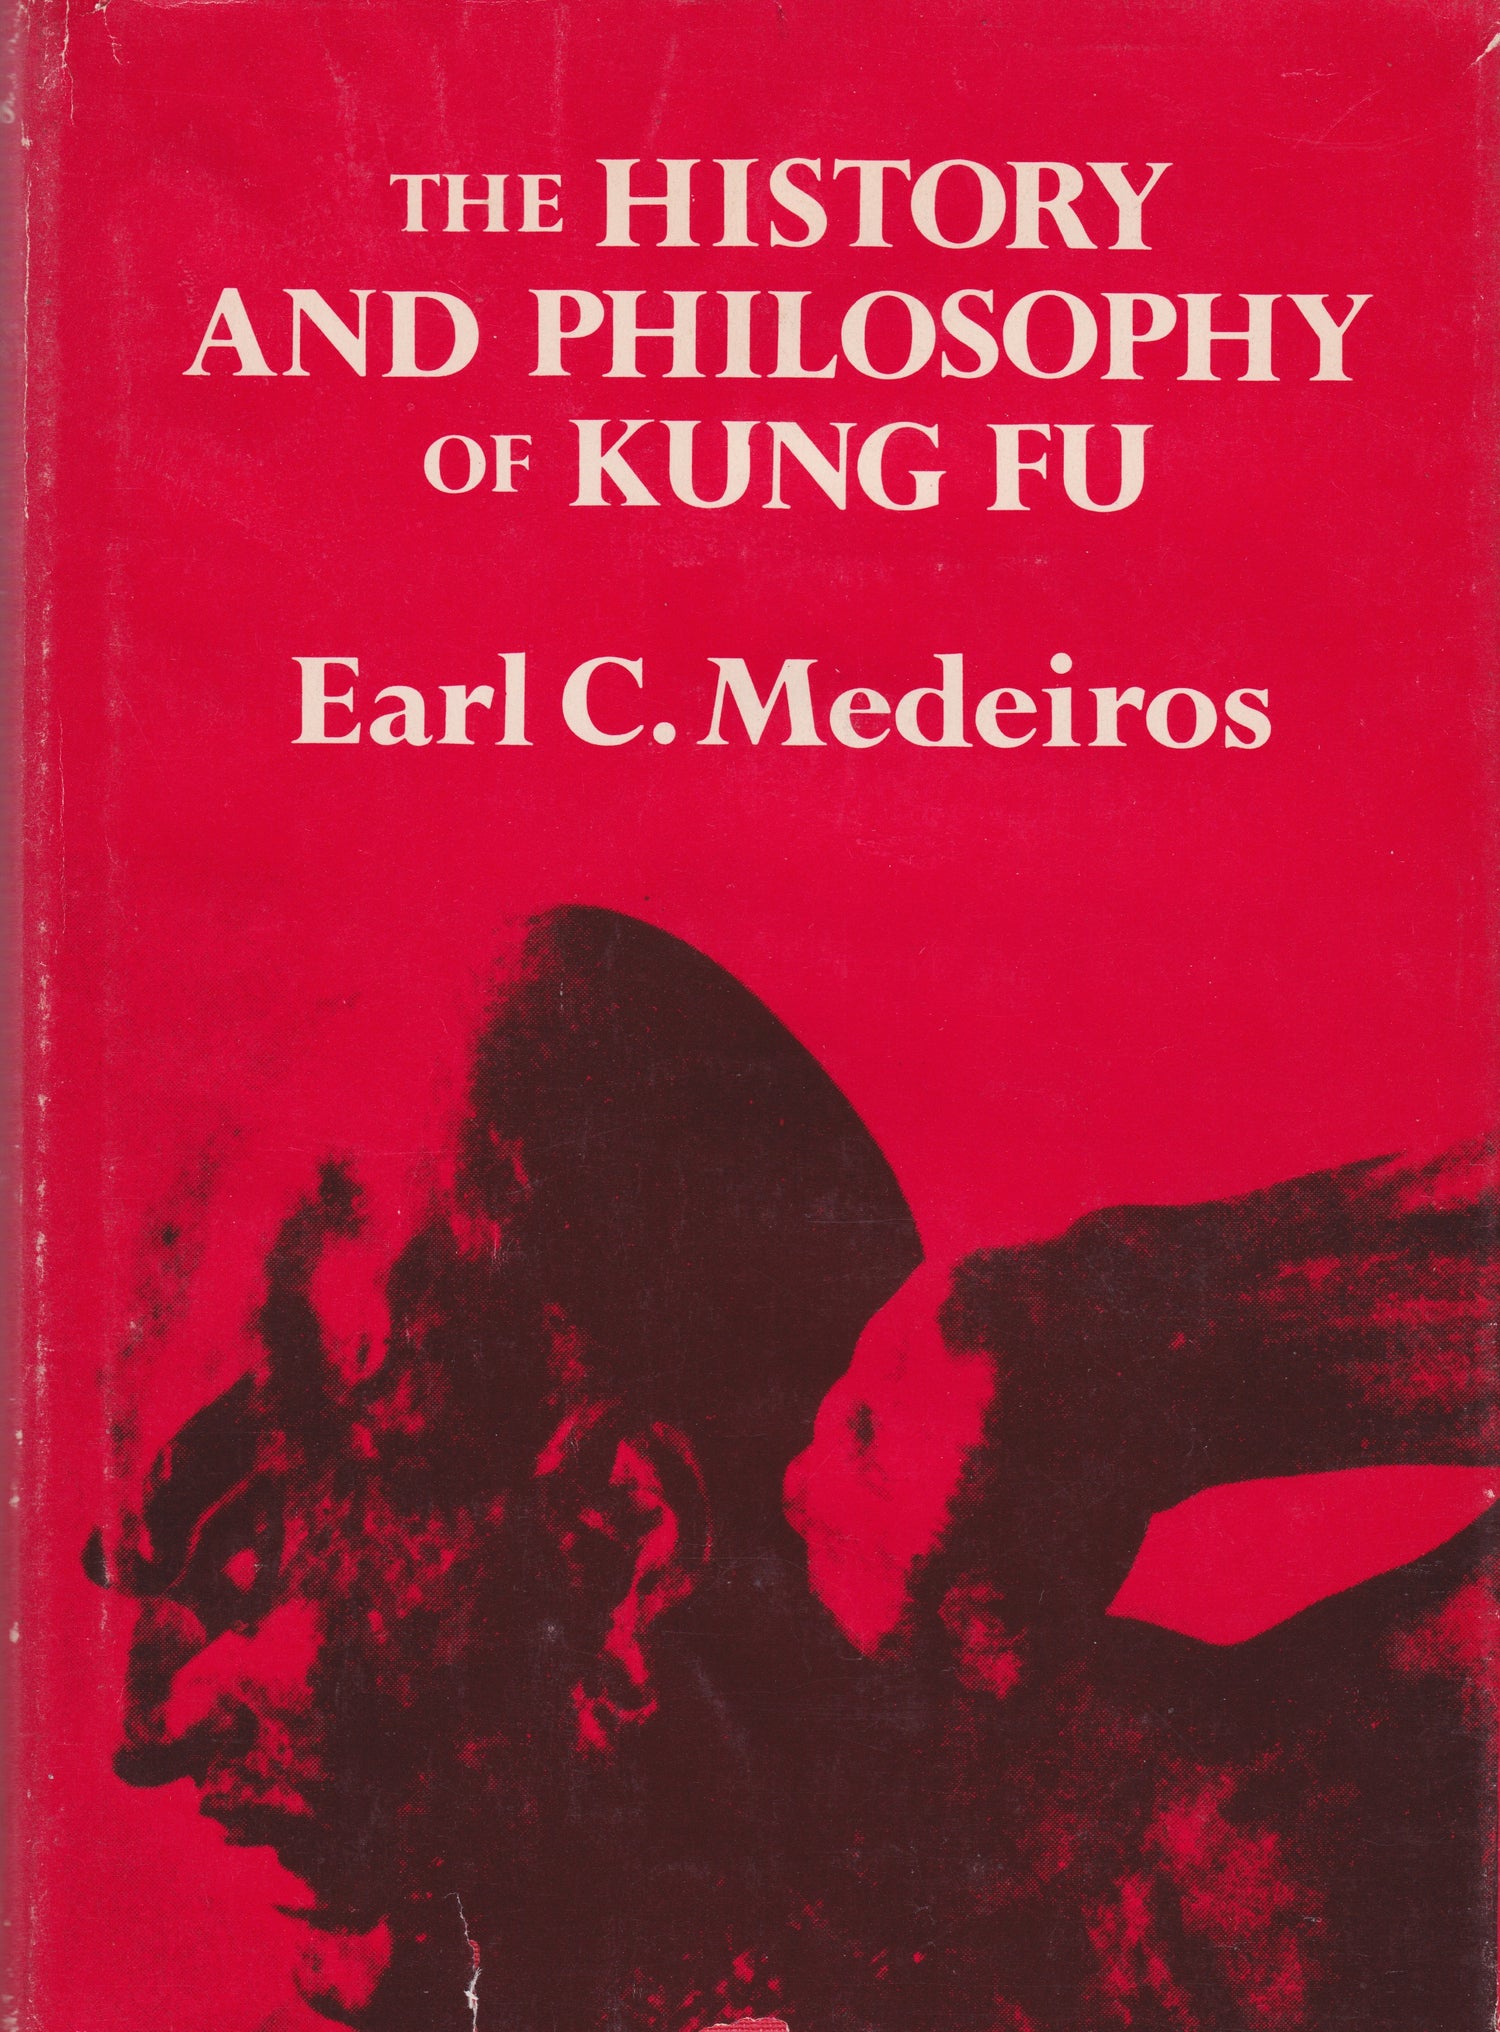 The Complete History and Philosophy of Kung Fu Book by Earl Medeiros (Preowned)